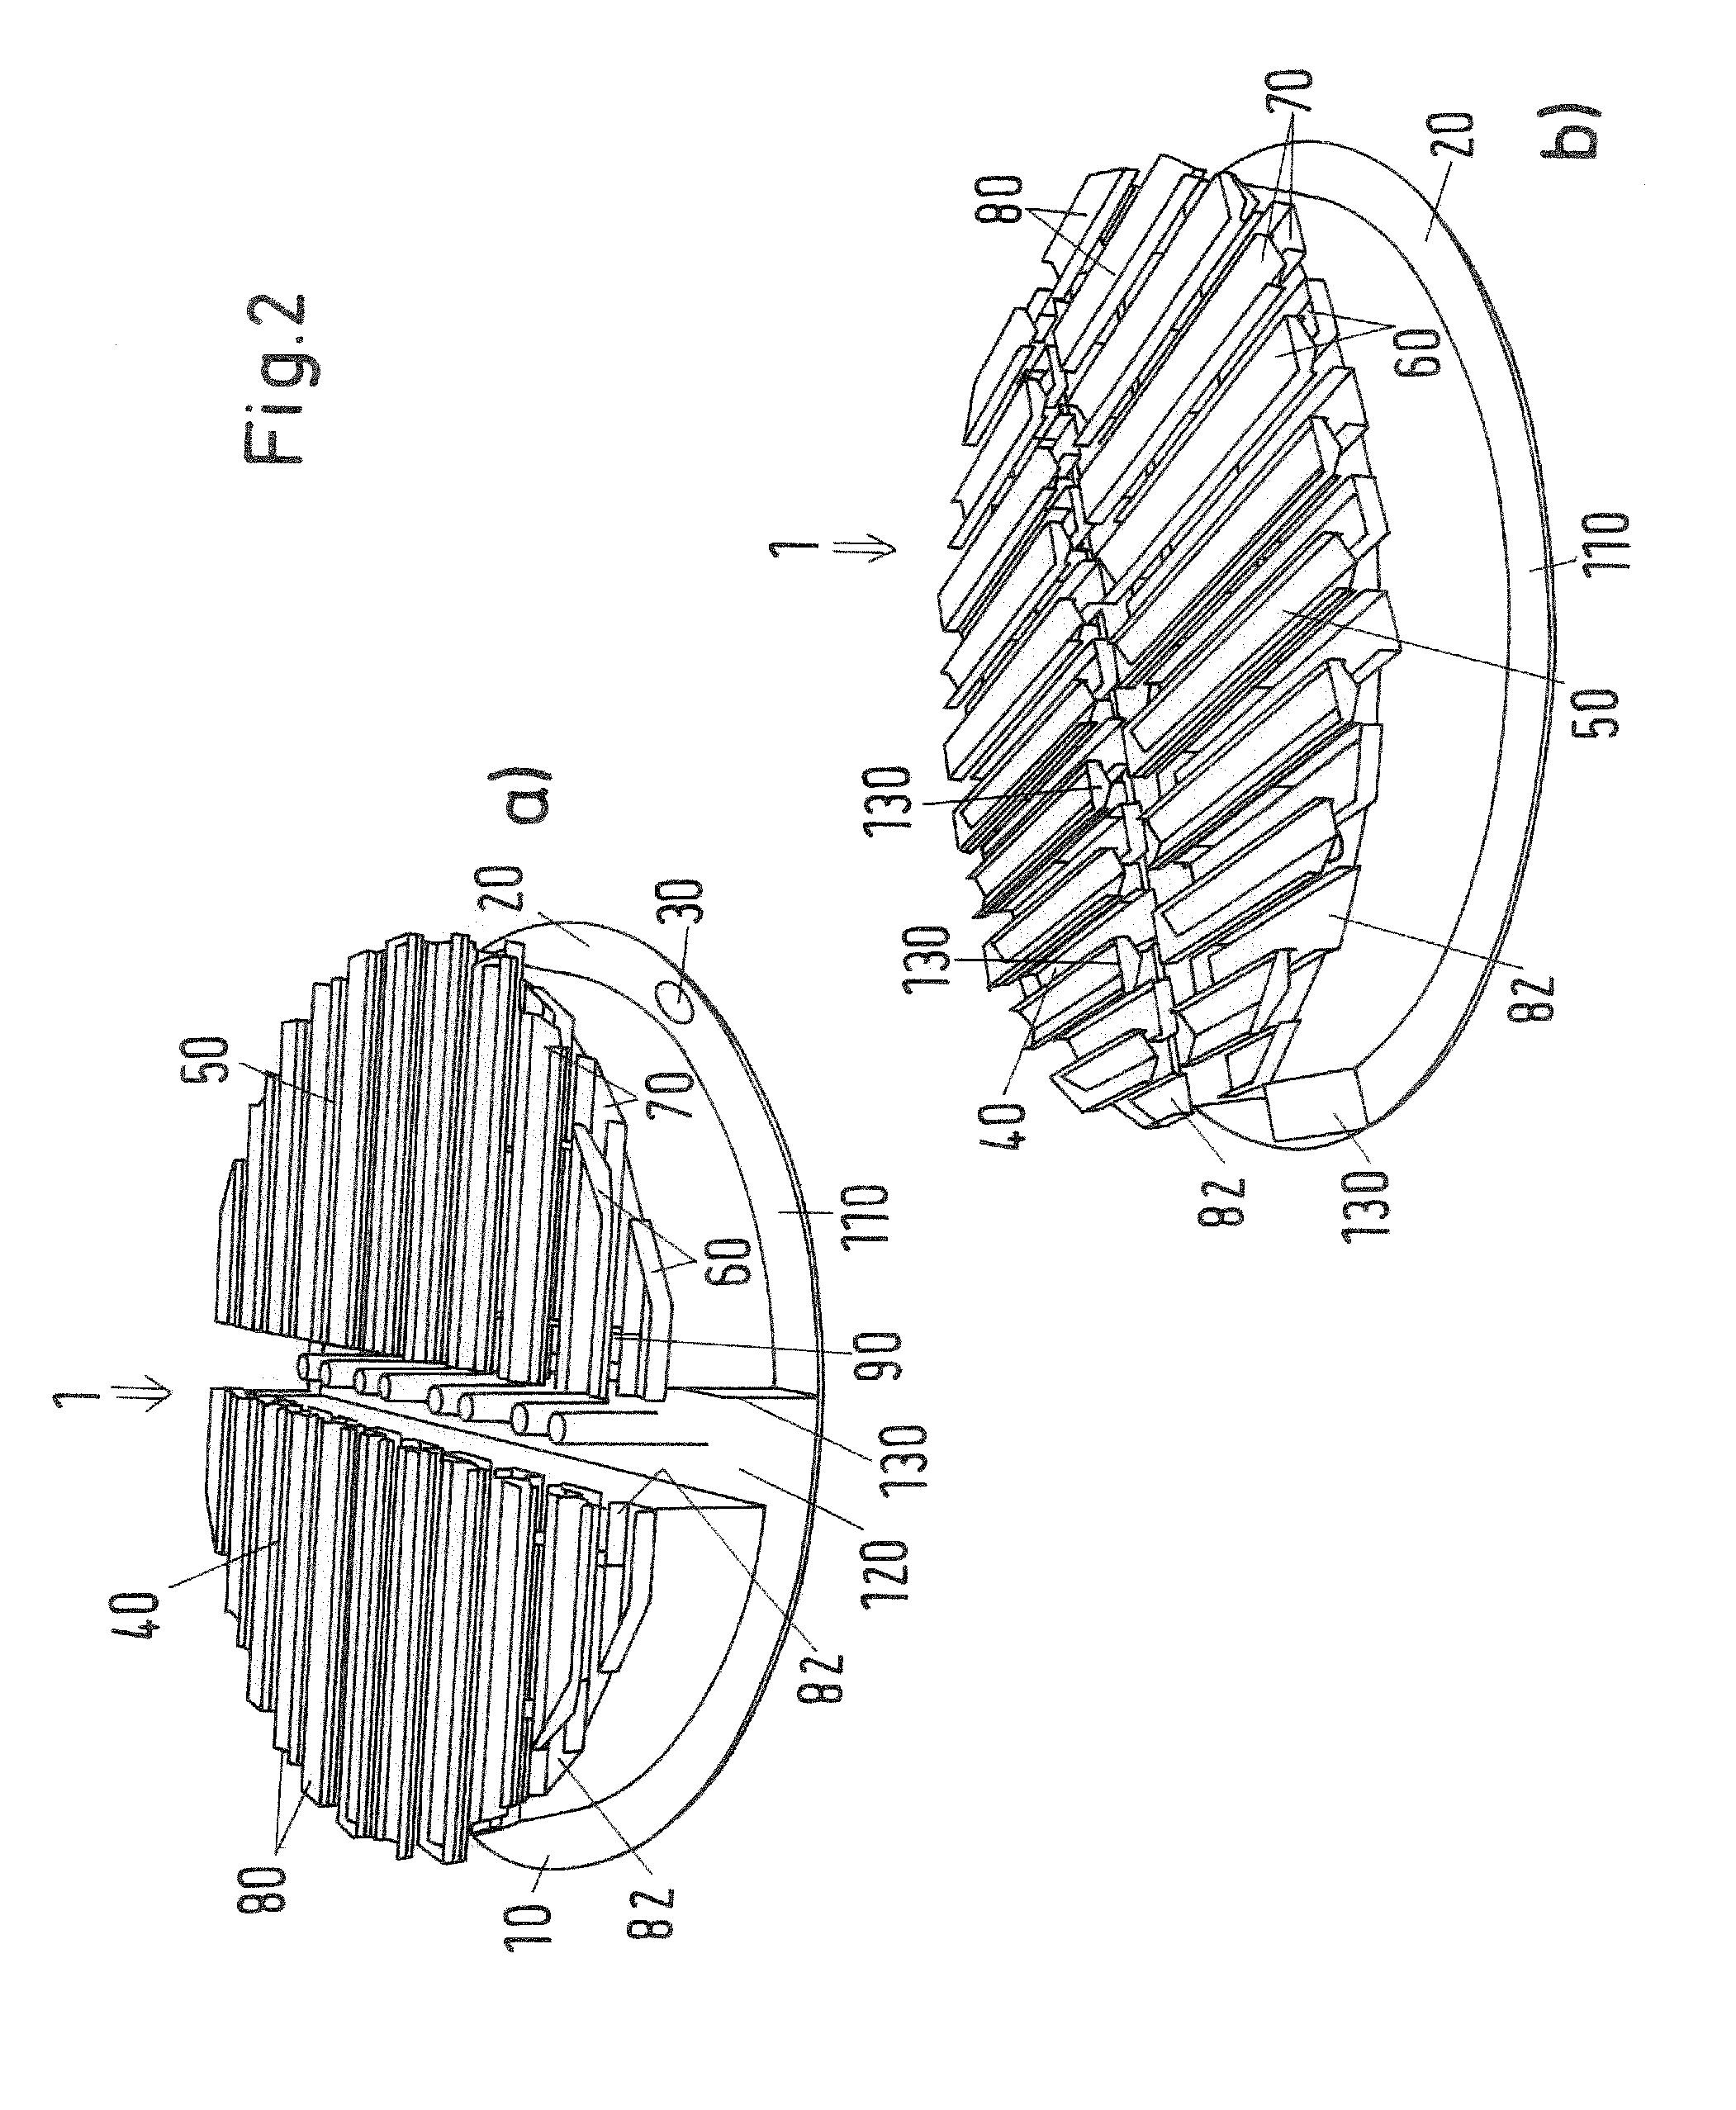 A Liquid Mixing Collector and a Method for its Use